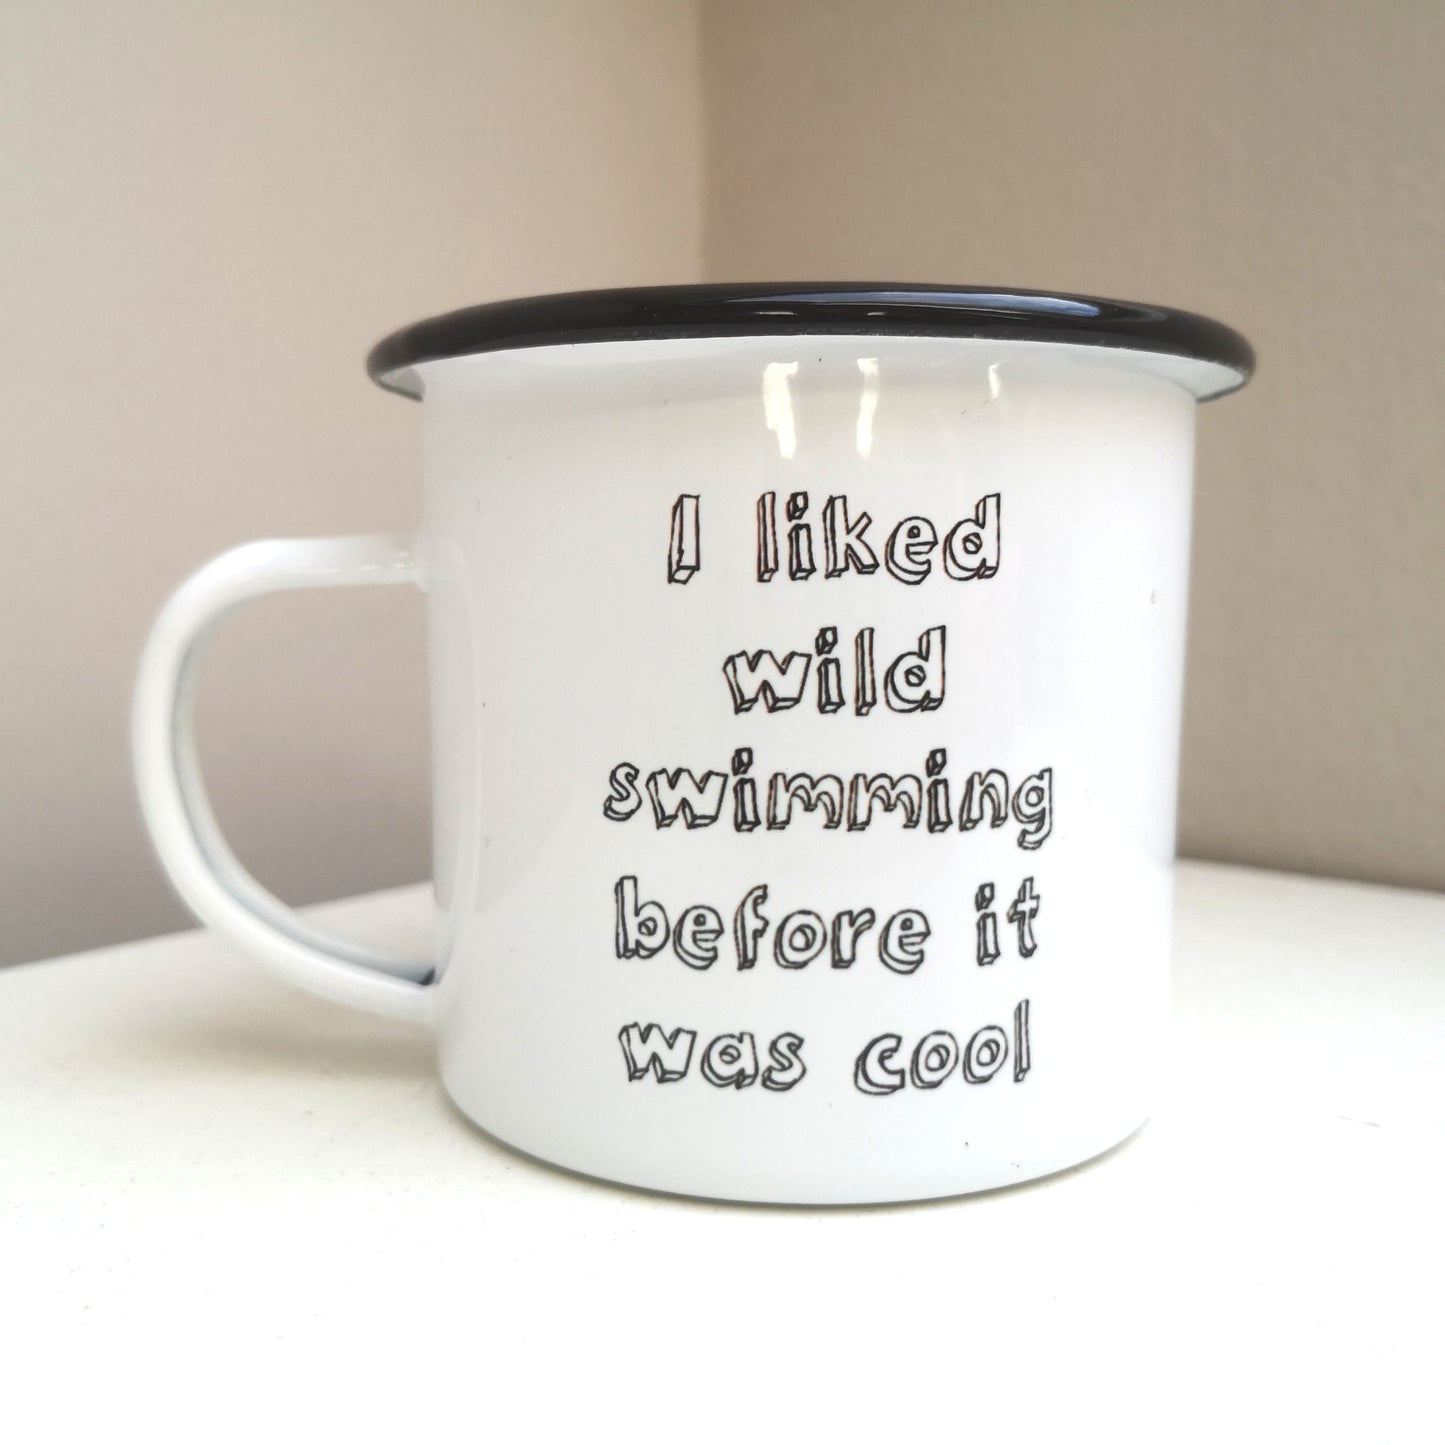 A white steel enamel mug with a black rim, with the following text in black 3d writing - I LIKED WILD SWIMMING BEFORE IT WAS COOL